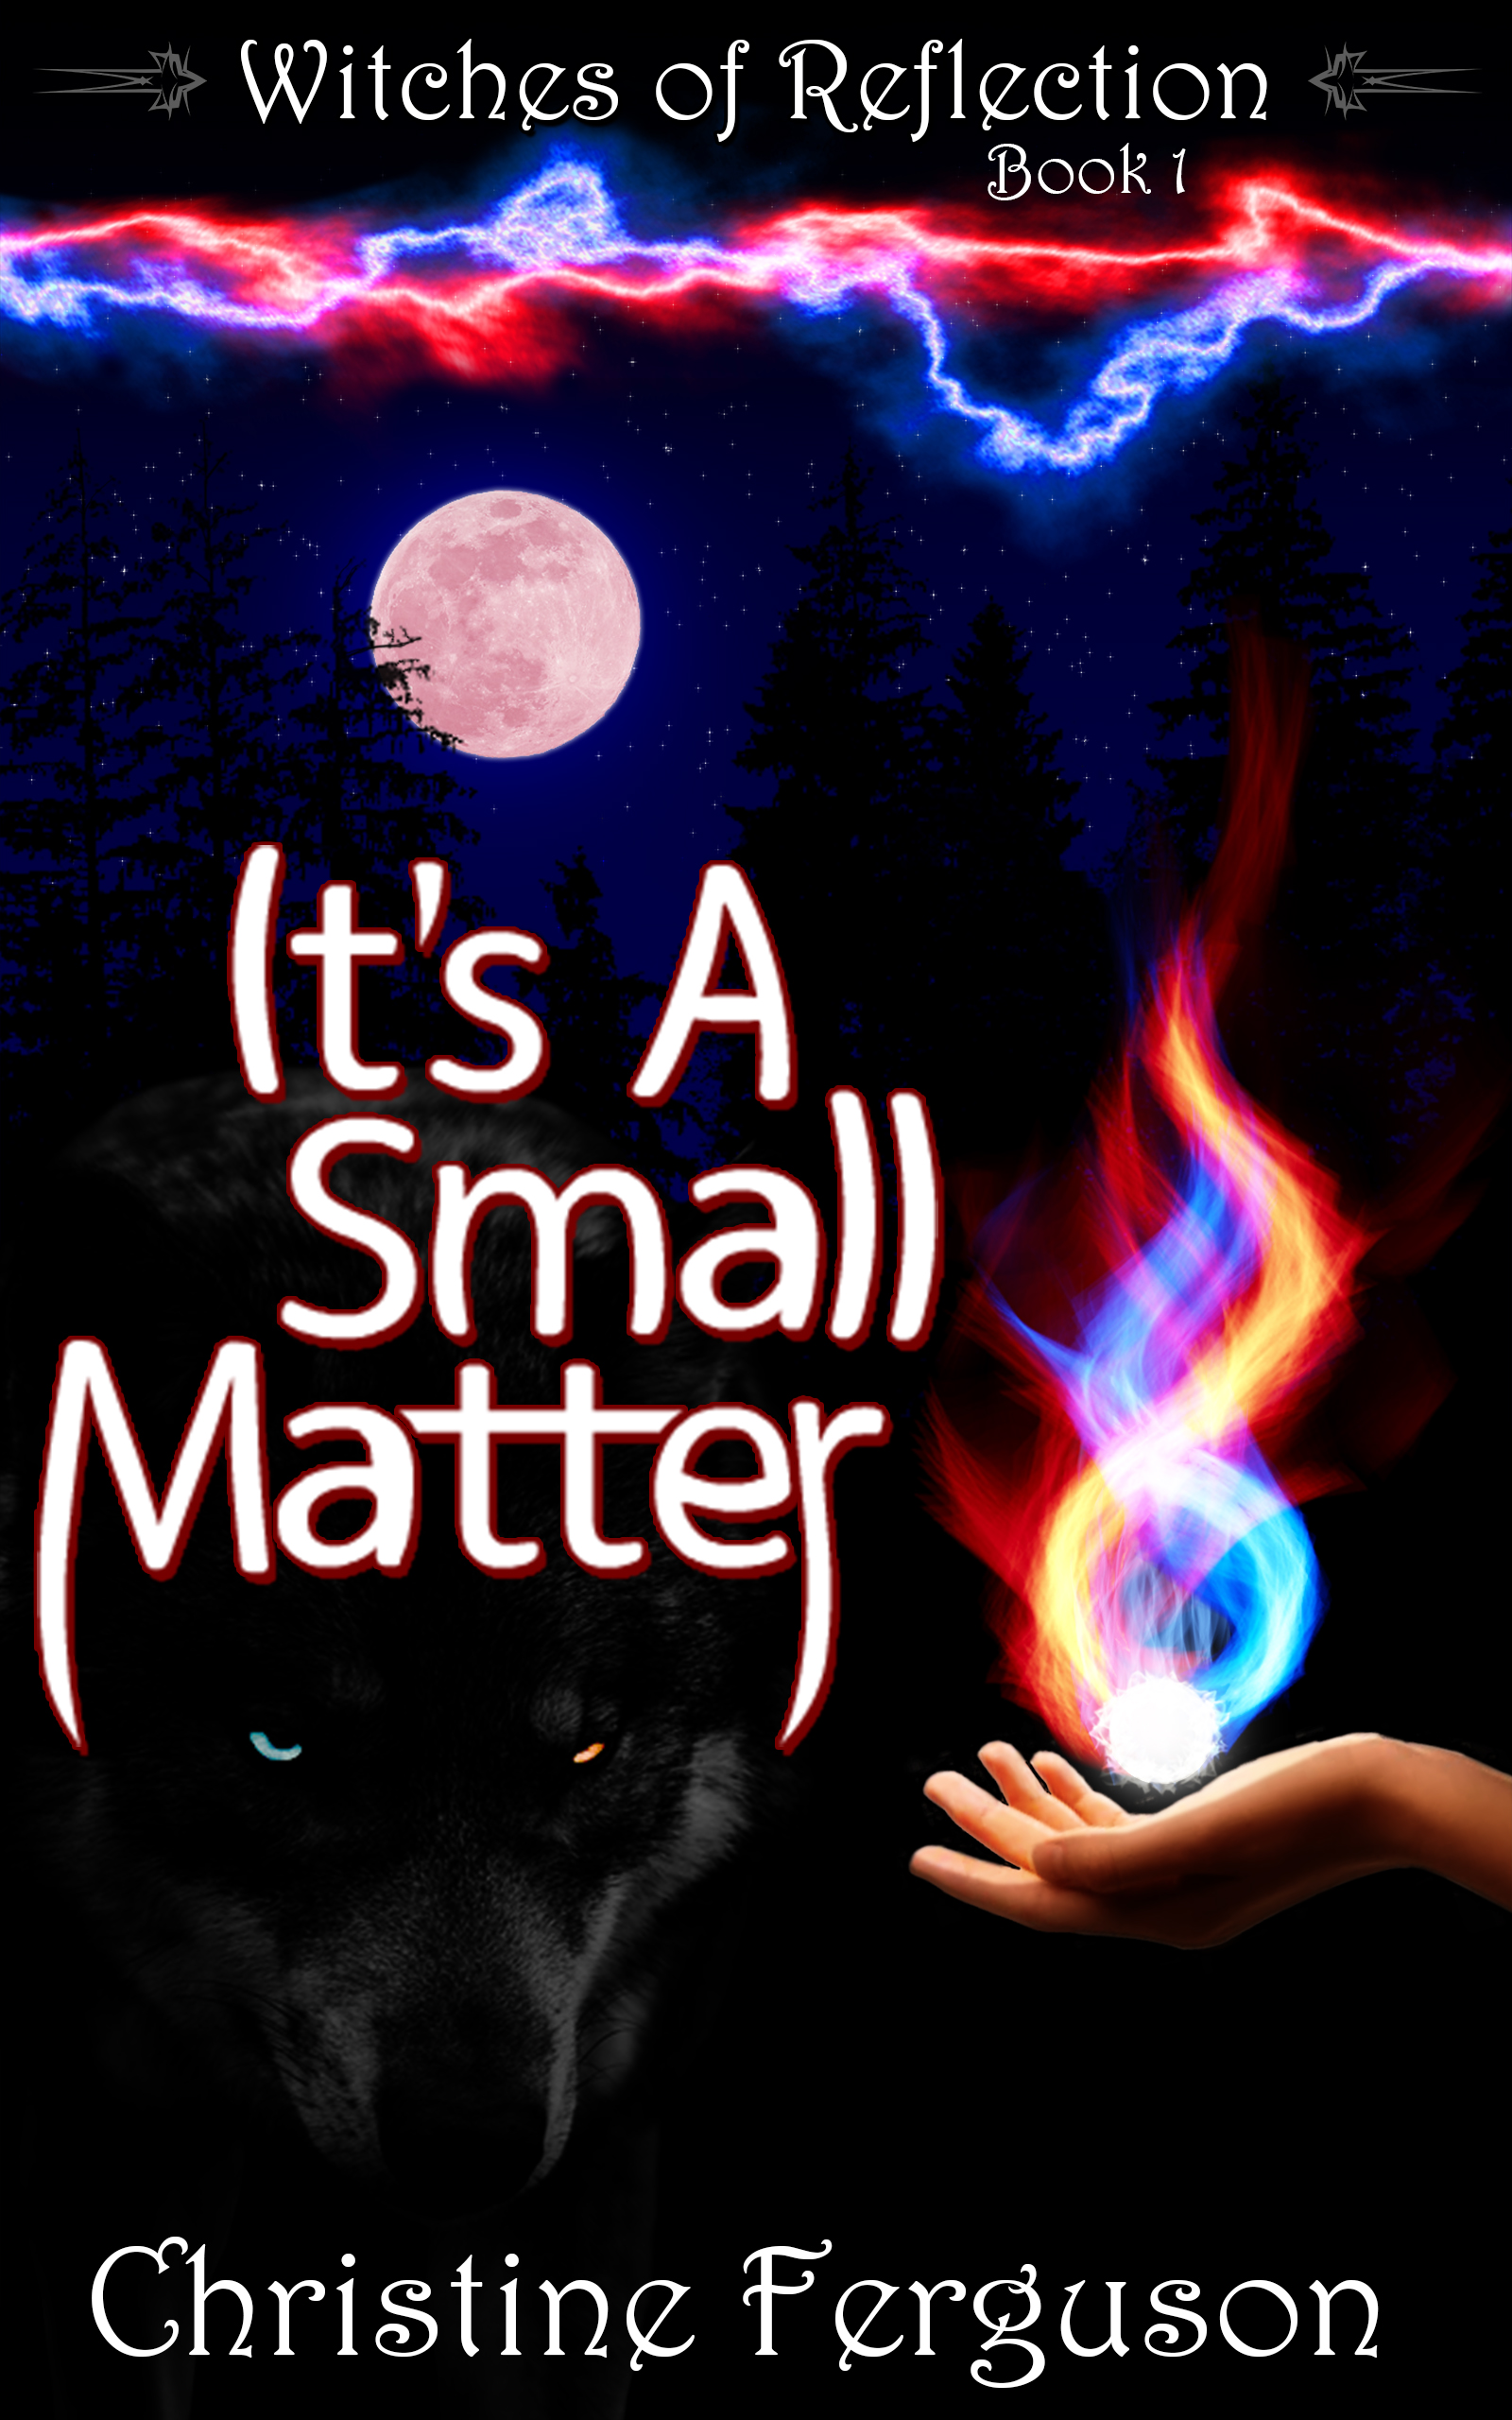 Werewolf Matters - Witches of Reflection Book 2